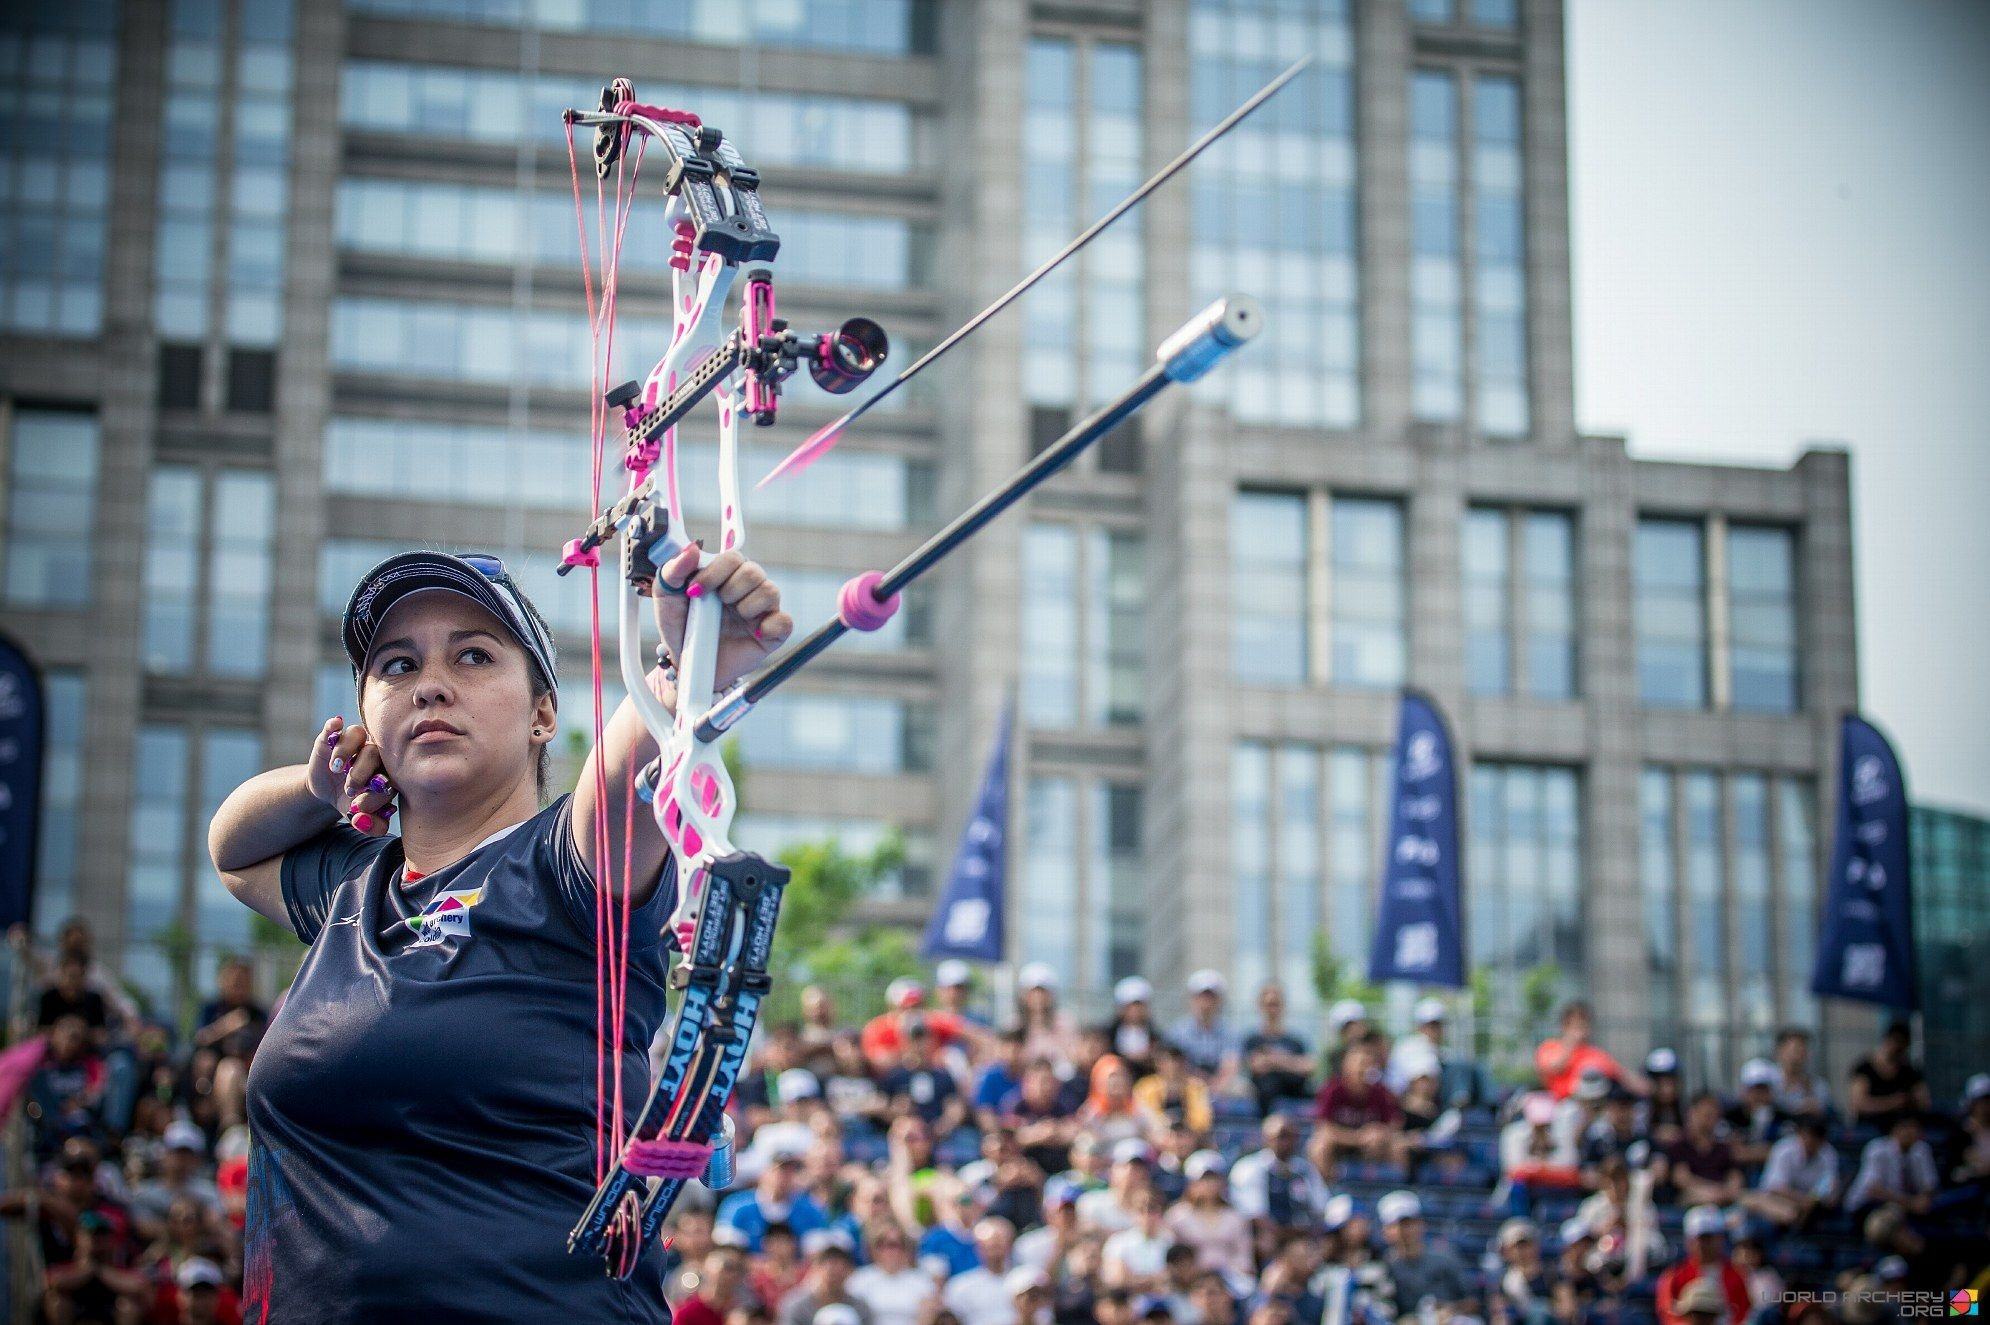 Colombia’s Sara López will be bidding for a third women’s compound Archery World Cup Final title this weekend with the 2017 edition scheduled to take place in Rome ©World Archery